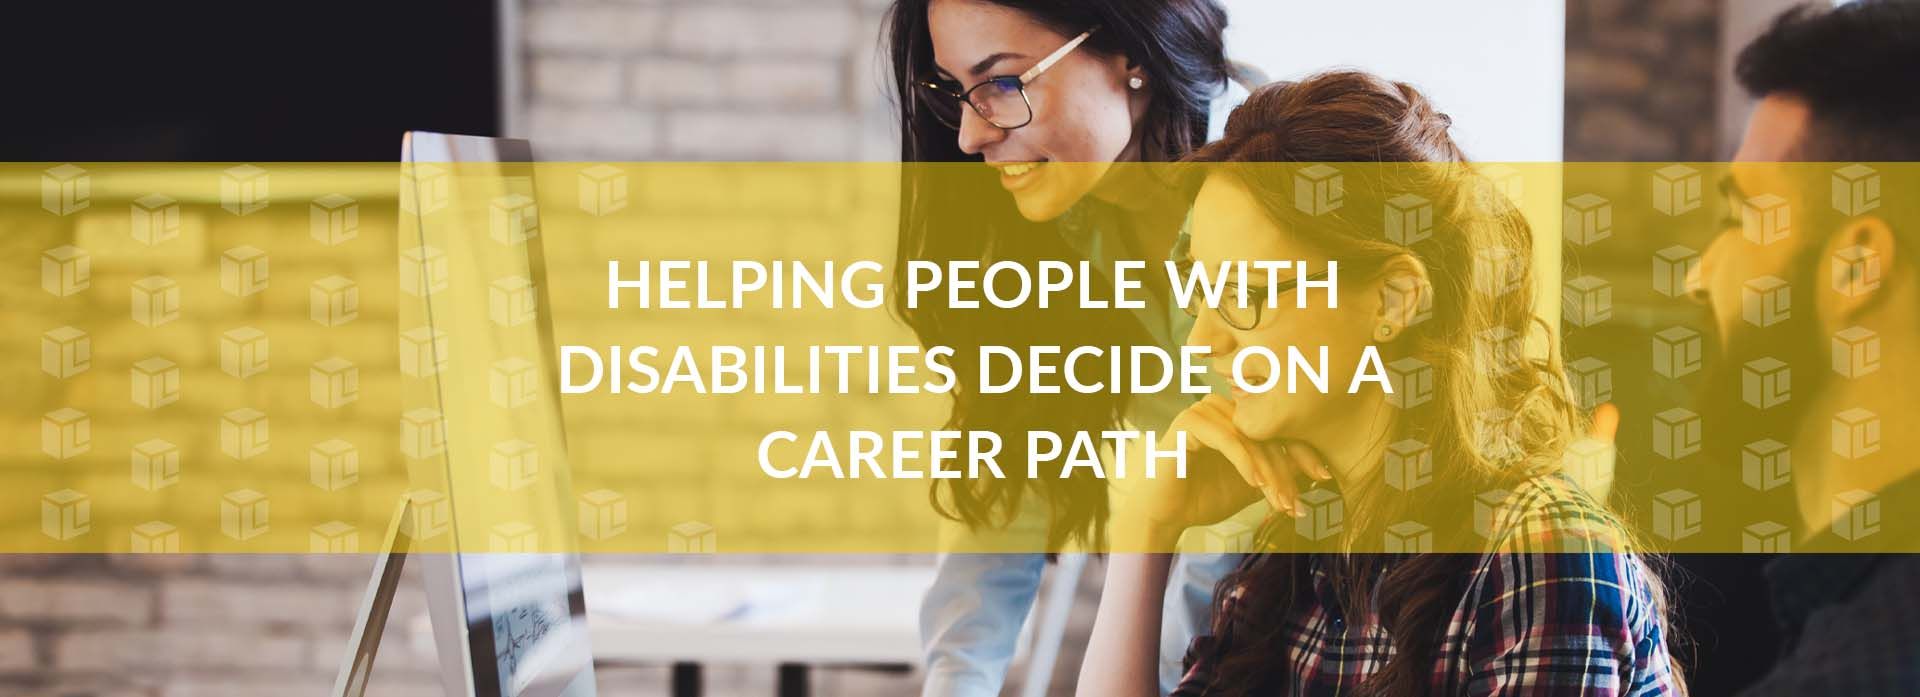 Helping People With Disabilities Decide On A Career Path Helping People With Disabilities Decide On A Career Path Helping People With Disabilities Decide On A Career Path Helping People With Disabilities Decide On A Career Path